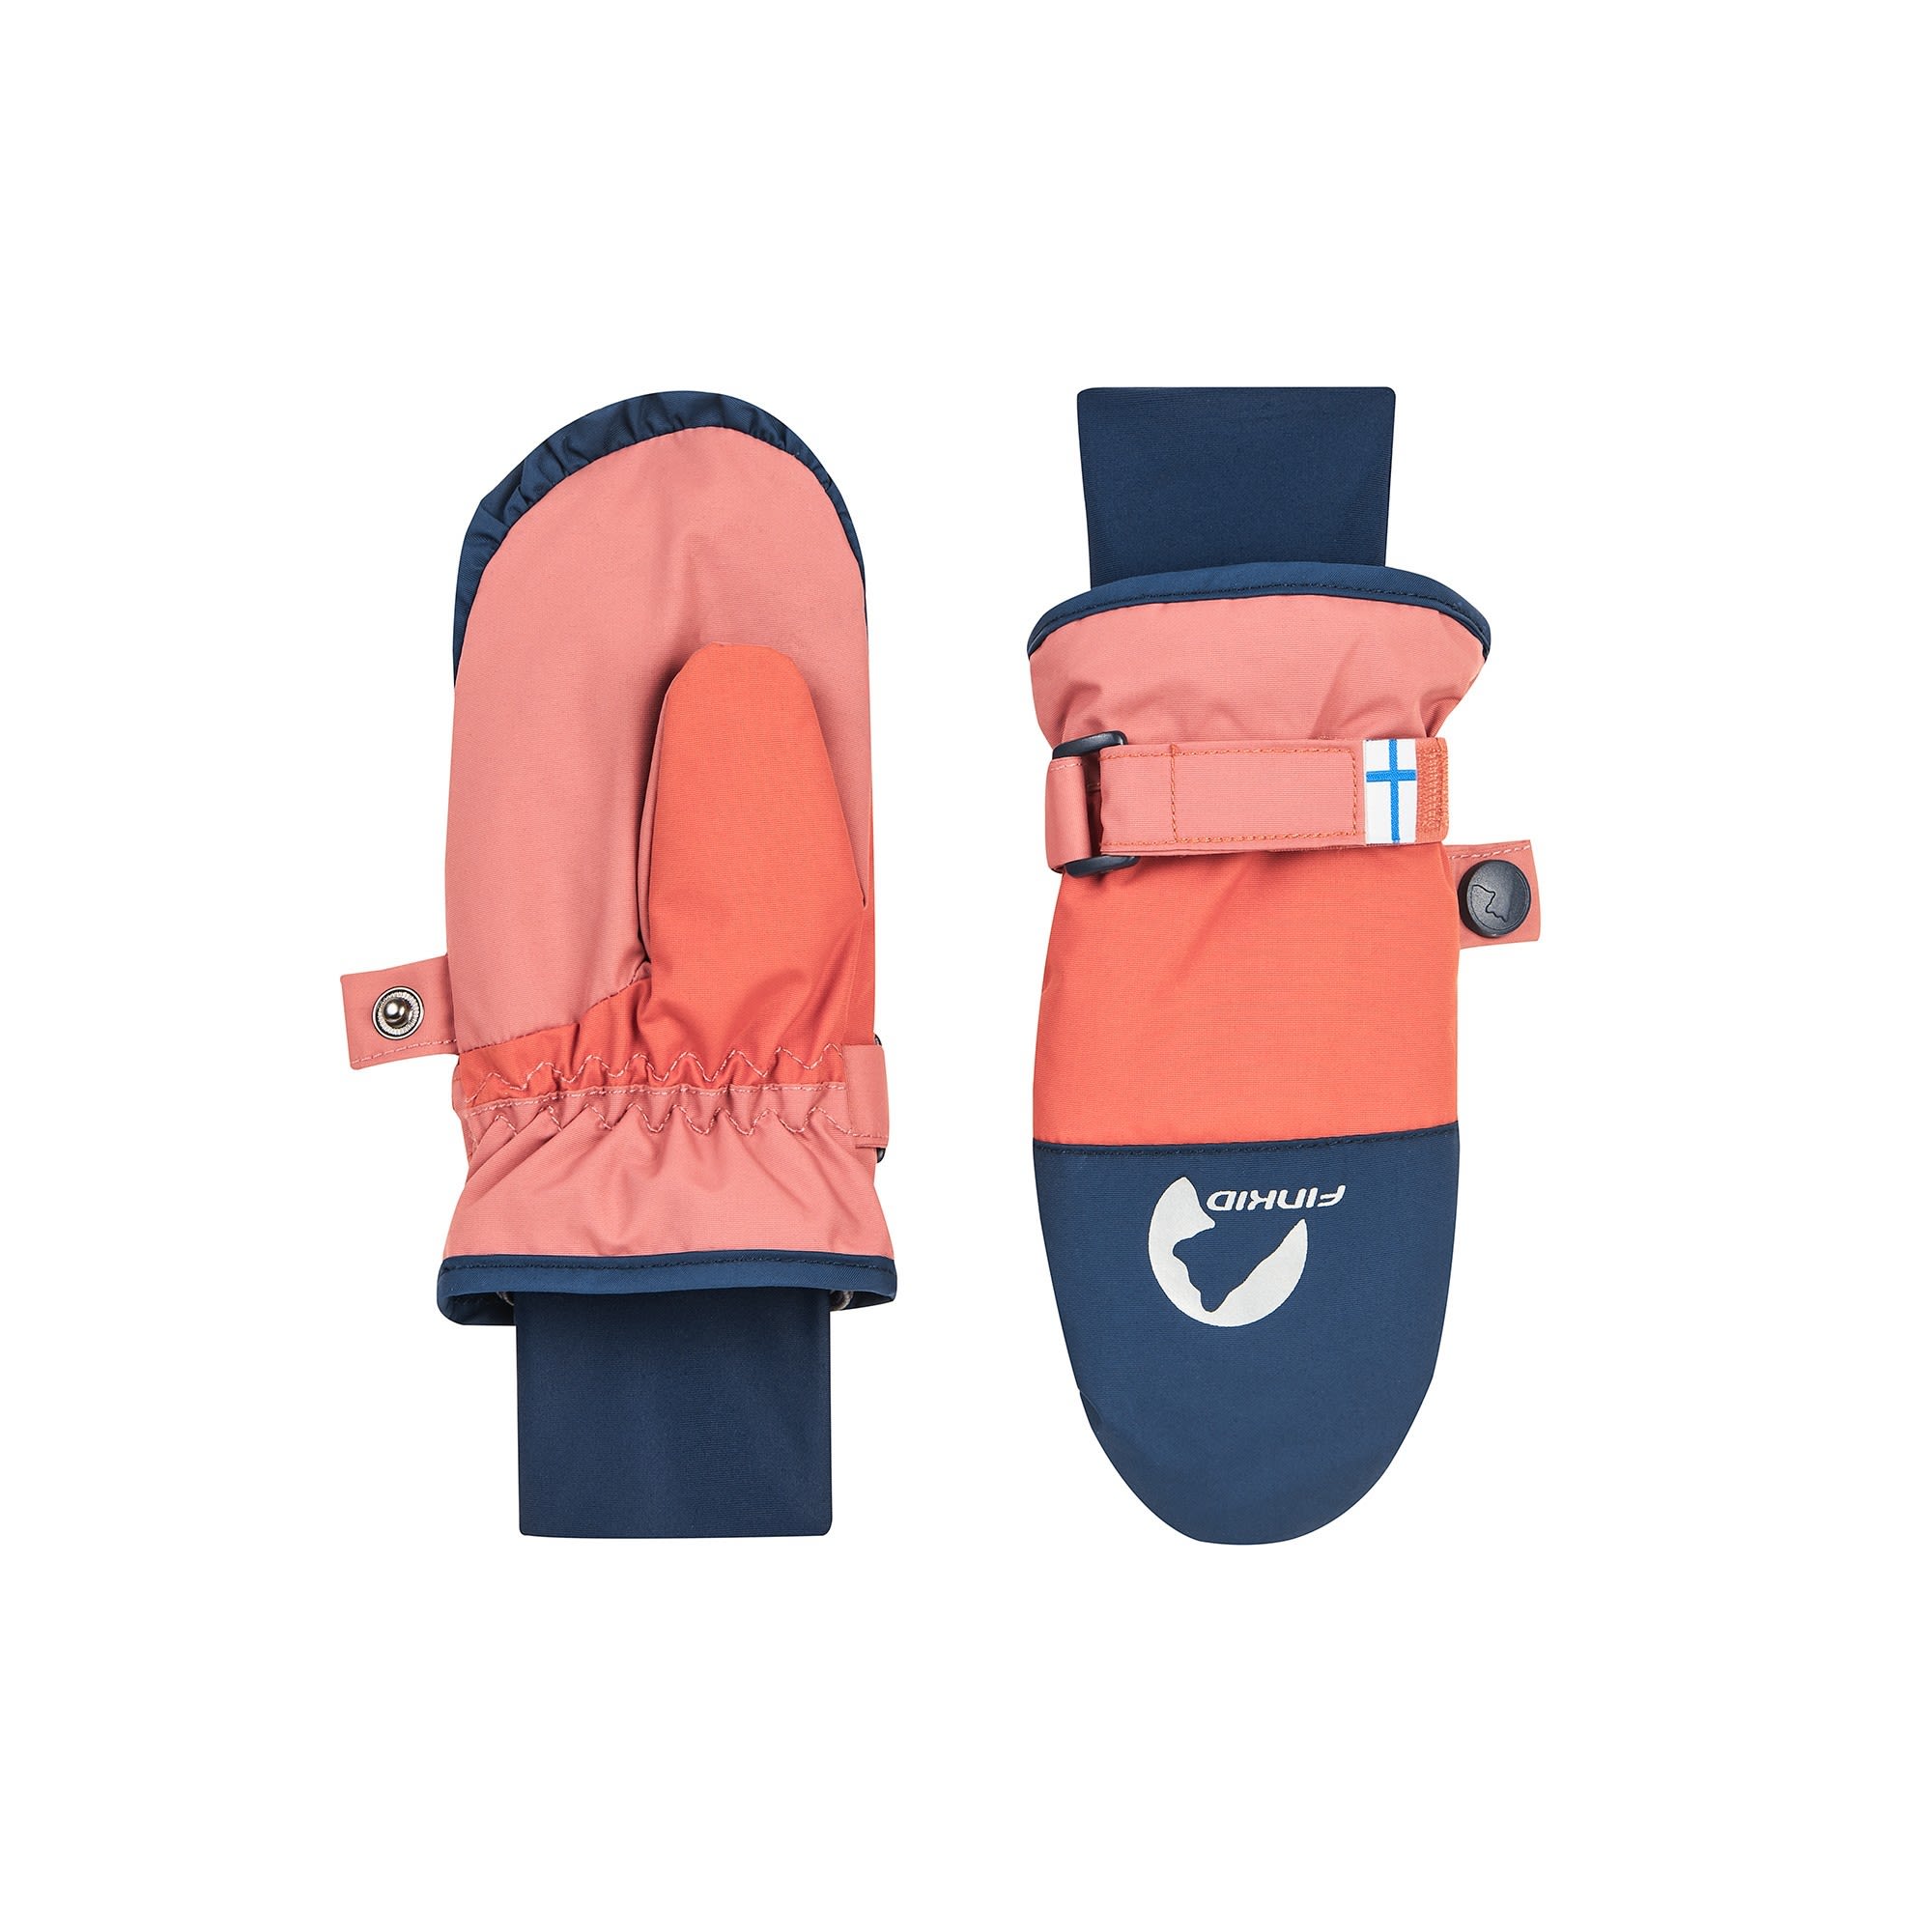 Finkid Kirjava Colorblock - Pink- Fausthandschuhe- Grsse S - Farbe Rose - Navy